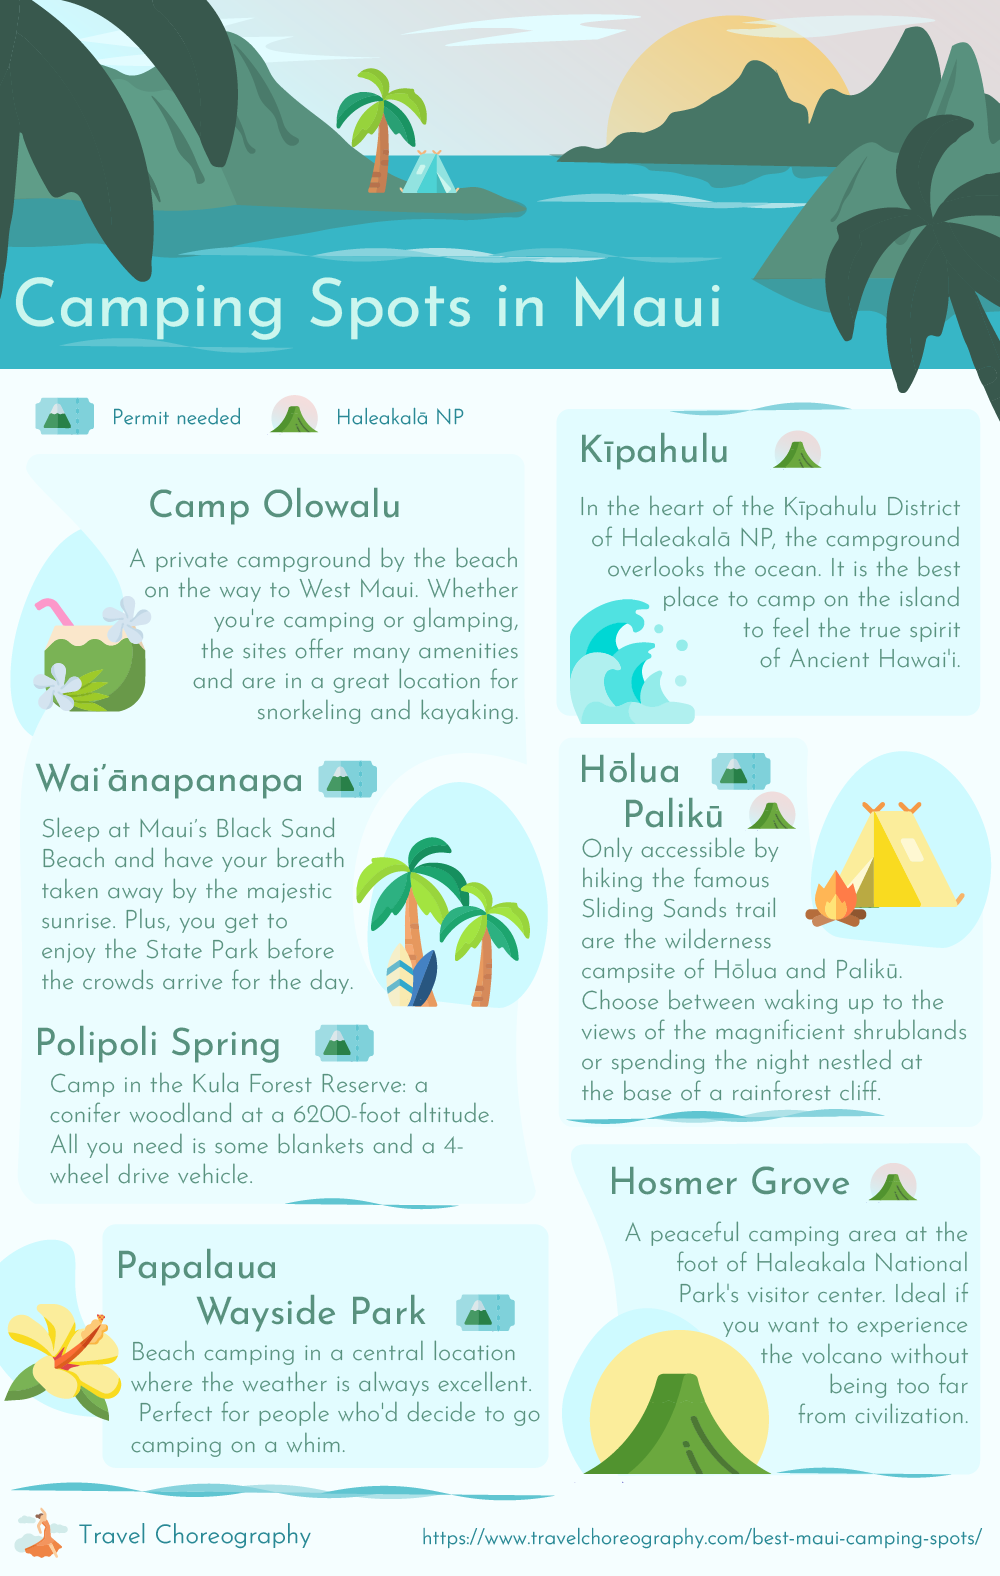 Camping Spots in Maui